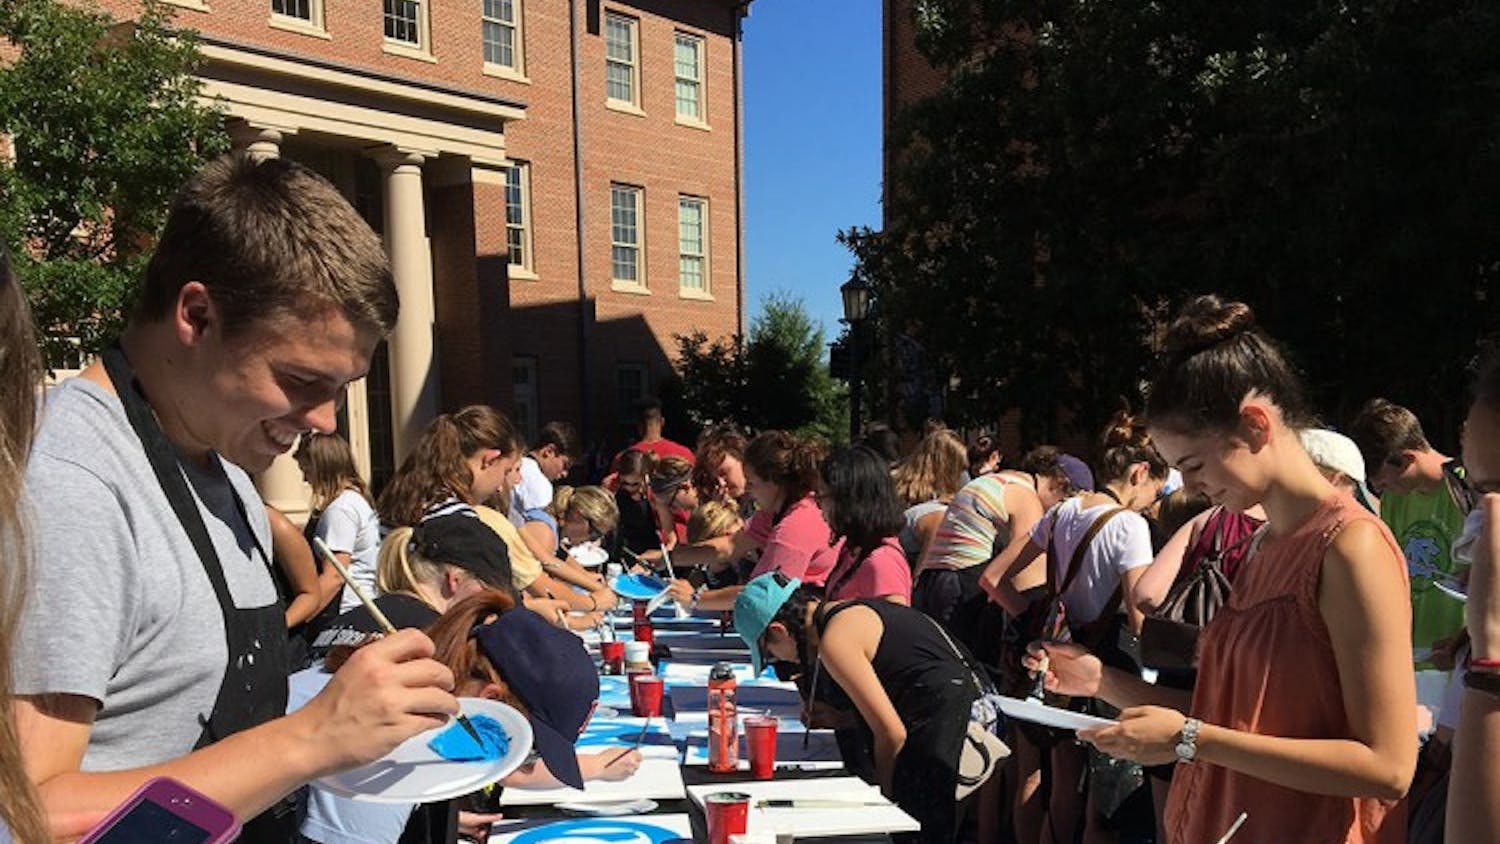 Students partake in "Paint a Picture of Your Carolina",&nbsp;a Week of Welcome event, led by the&nbsp;Wine & Design group.&nbsp;Photo Courtesy of Roslyn Sloop-Troutman.